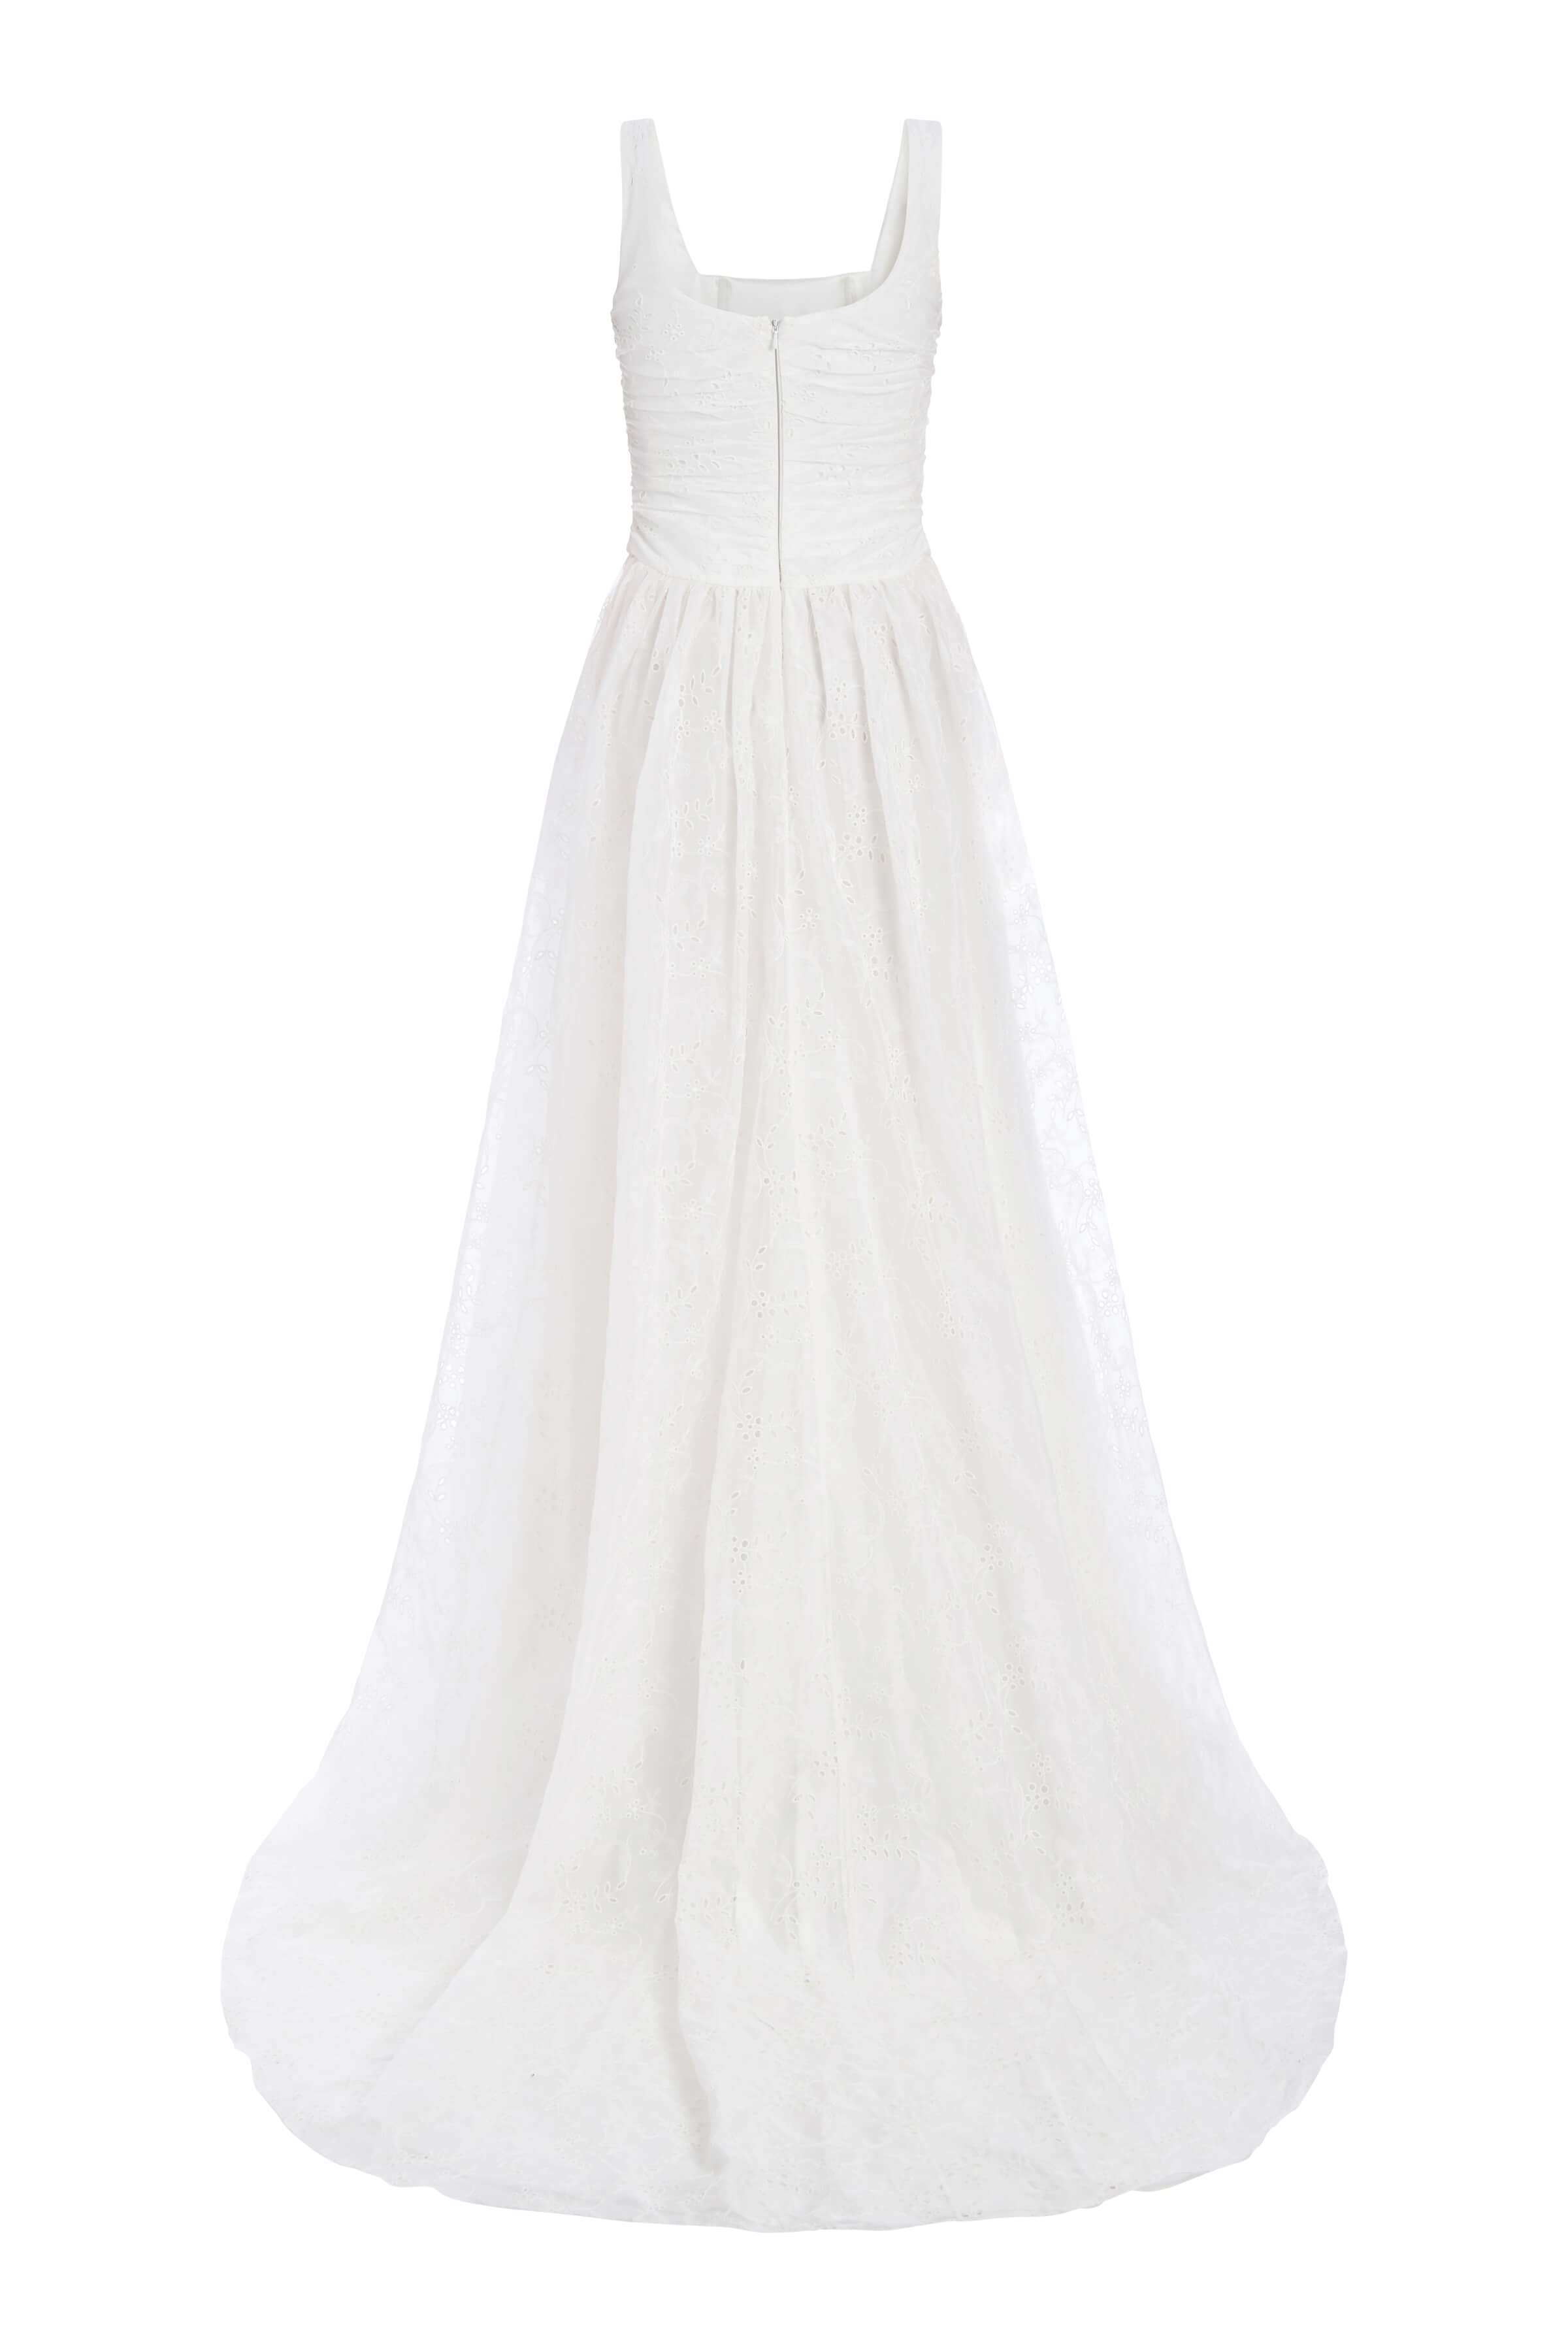 Hippolyta Ivory Floral A-Line Gown